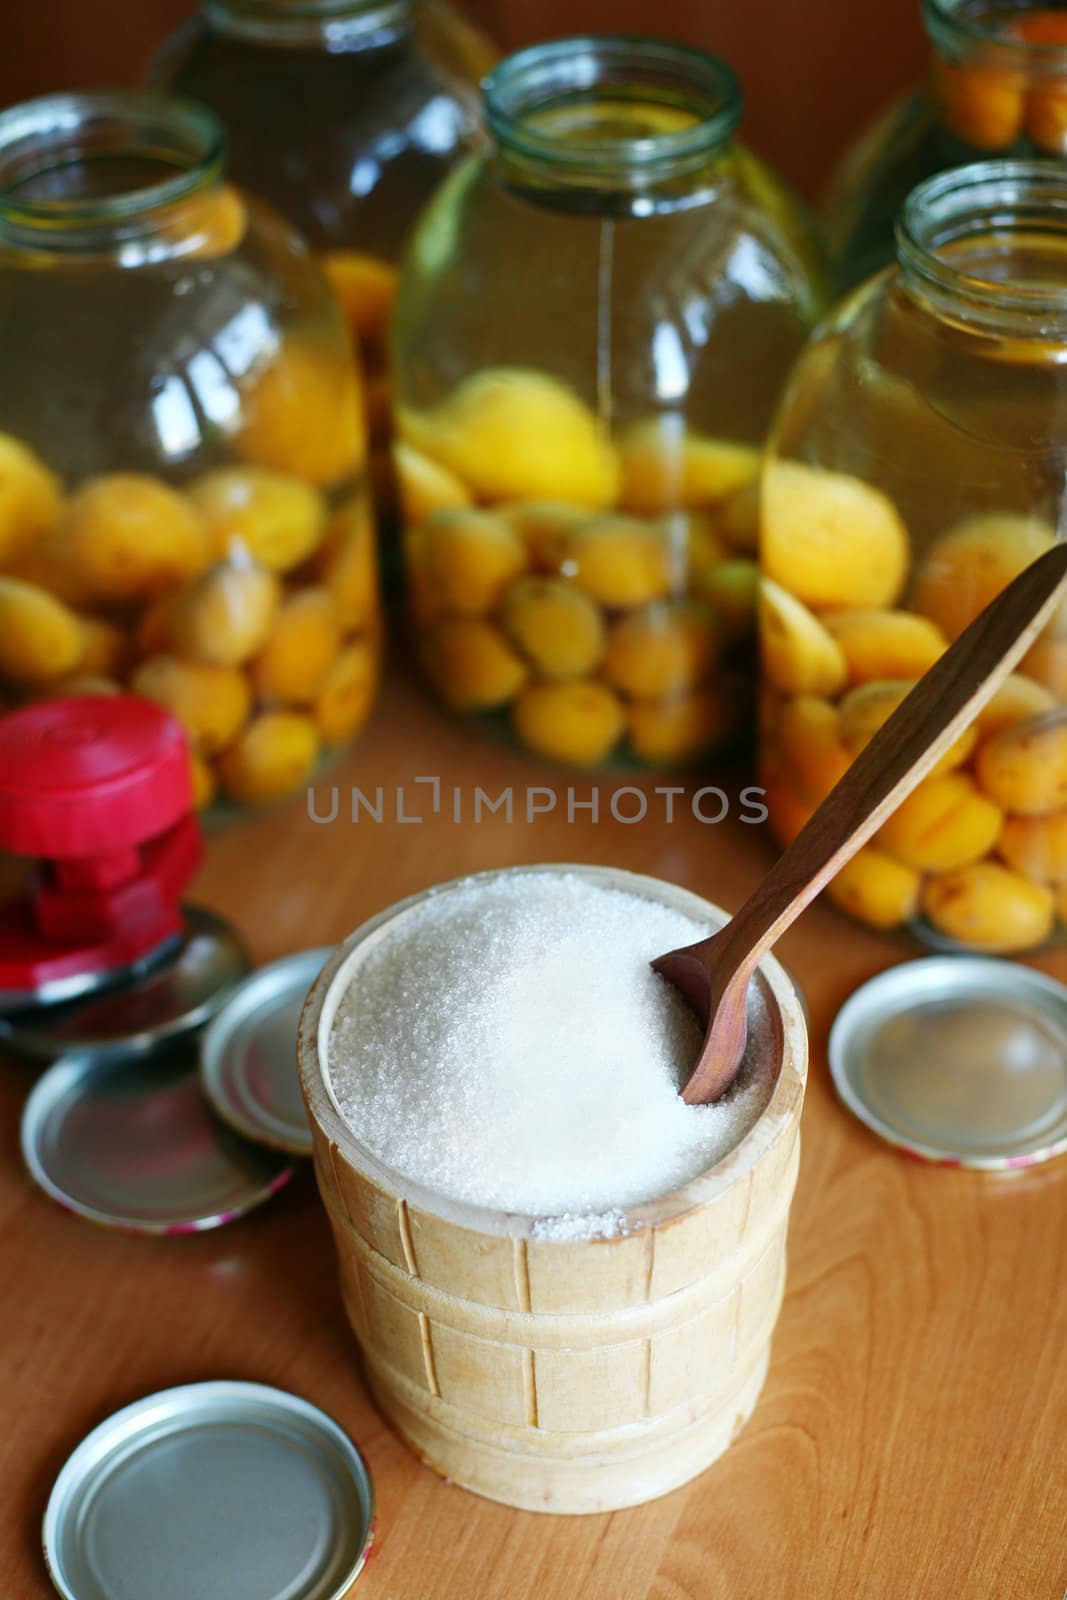 An image of sugar and jars with apricots